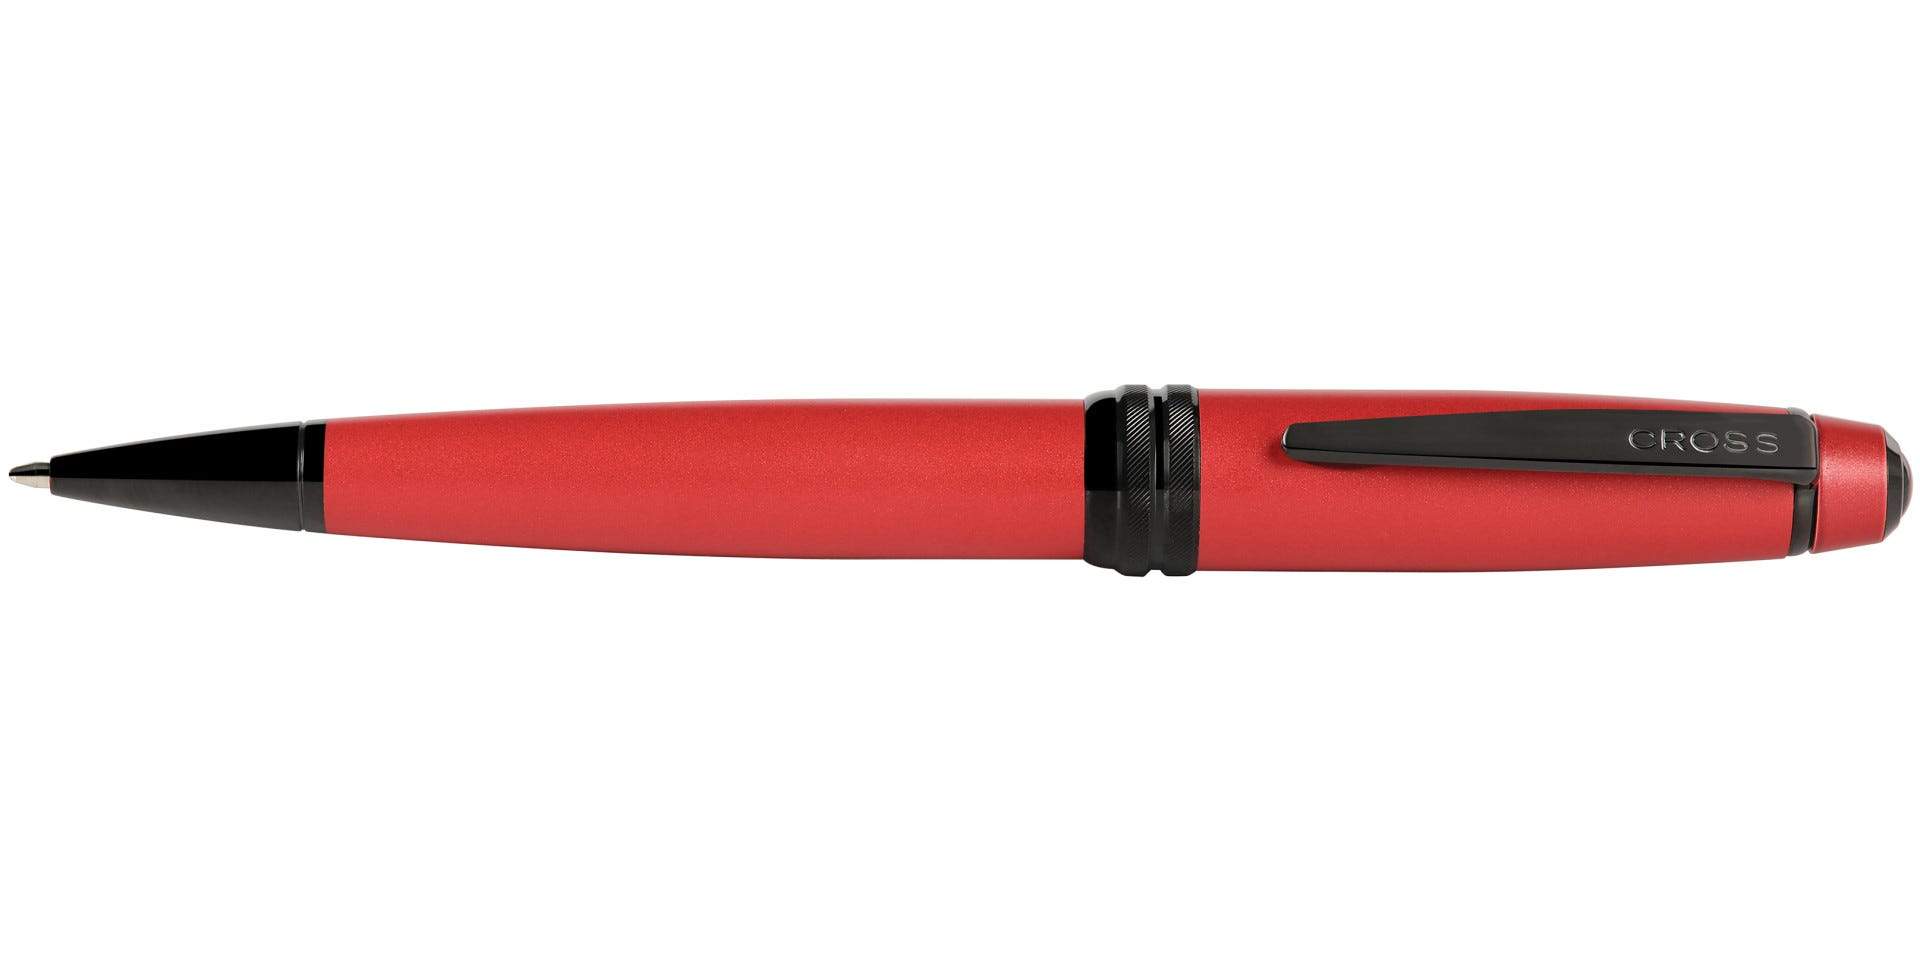 CROSS BAILEY MATTE RED LACQUER BALLPOINT PEN - AT0452-21